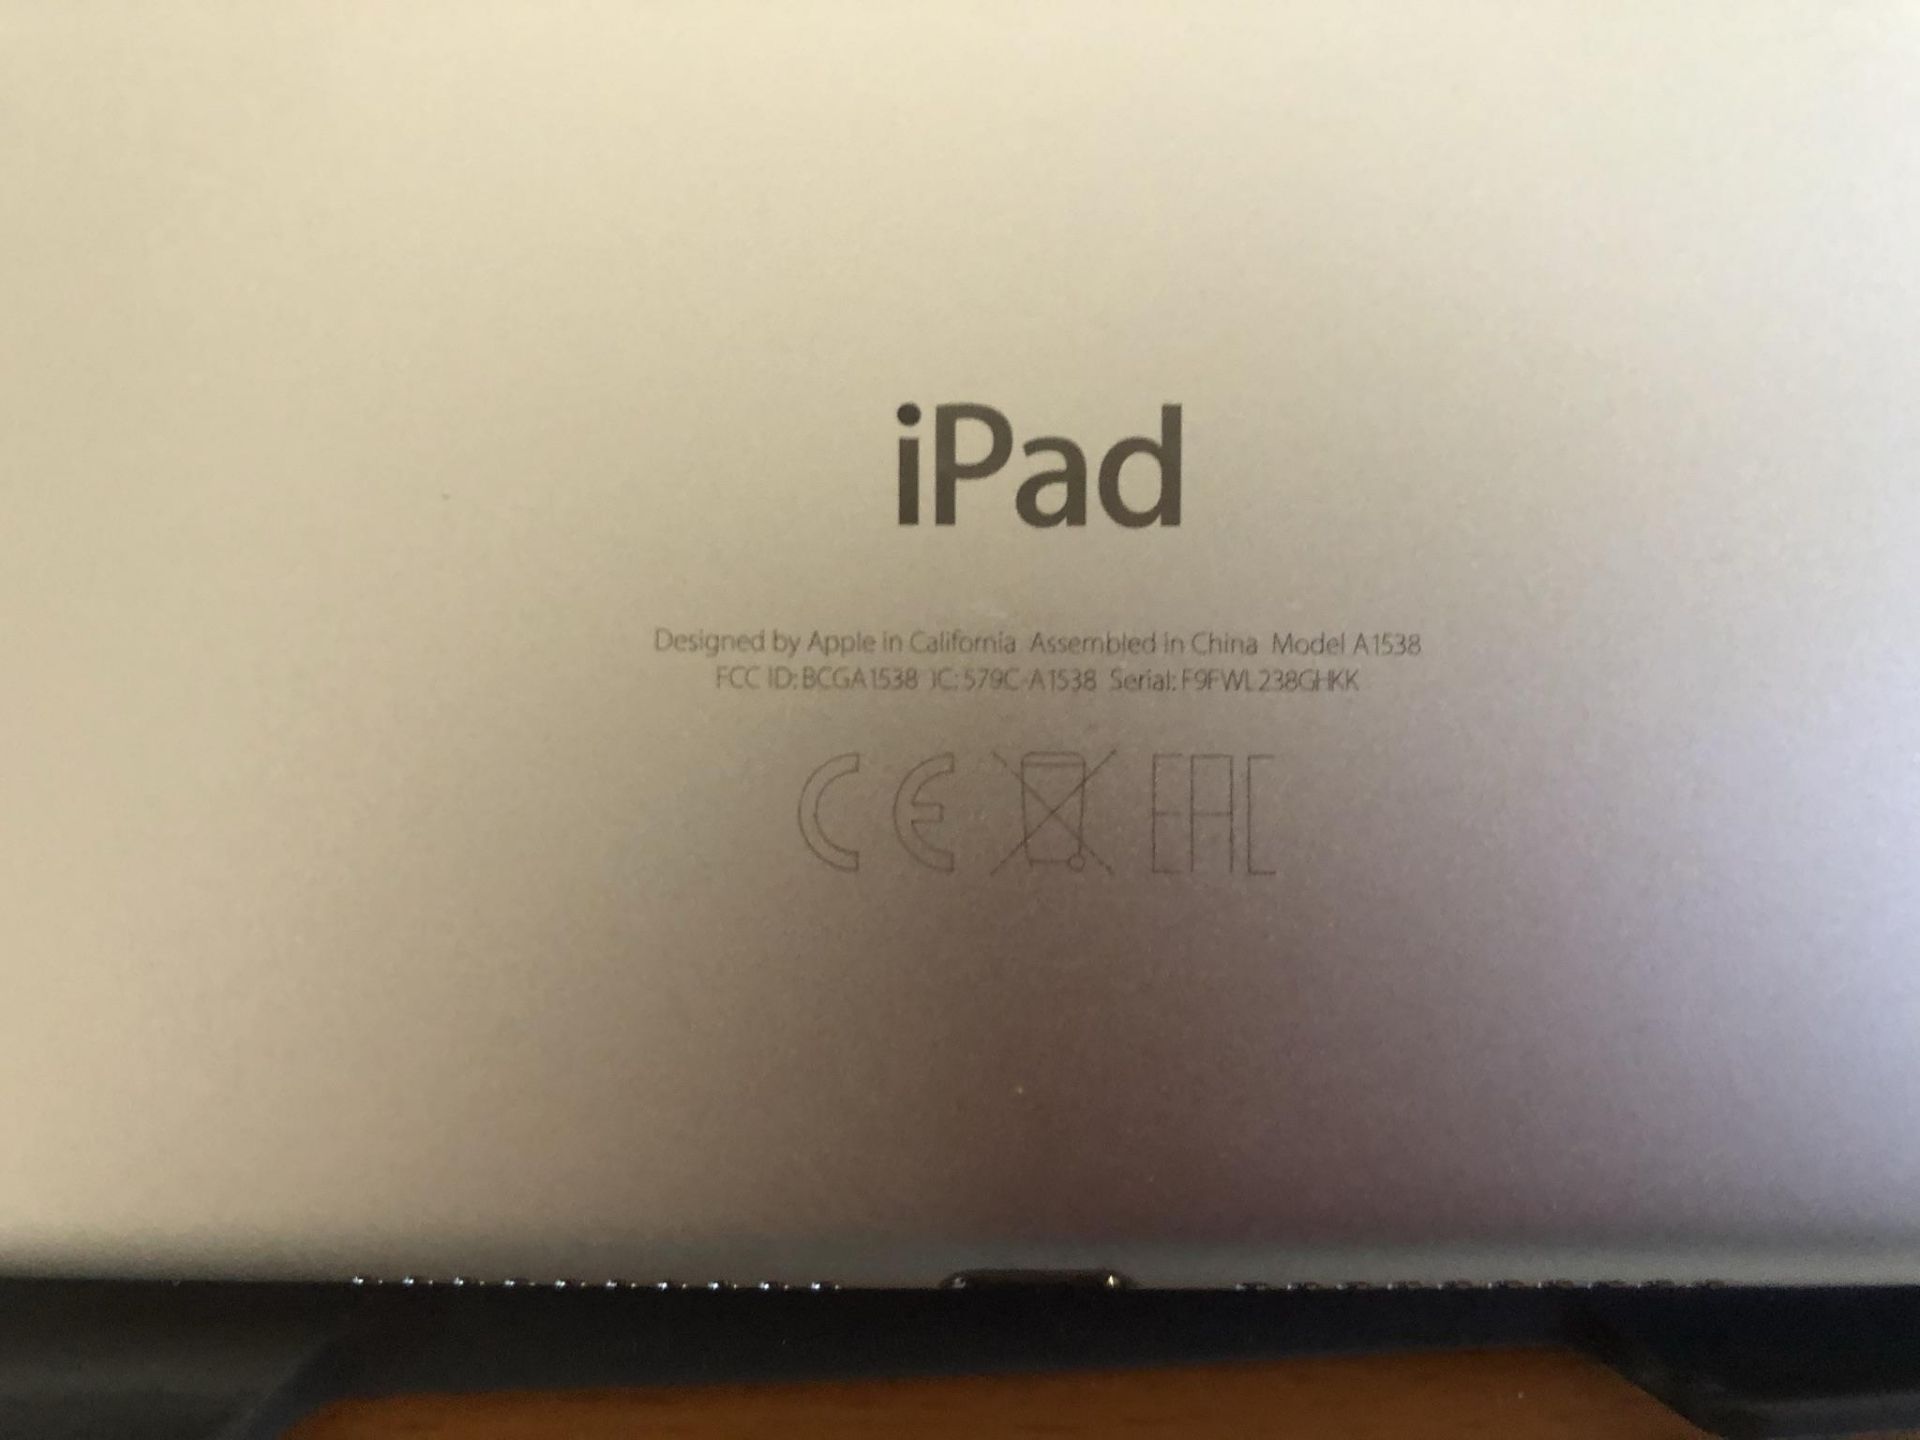 Apple iPad Mini 4 (A1538) Touchscreen Tablet w/ Case & Charger | Late 2015 Model - Image 6 of 6